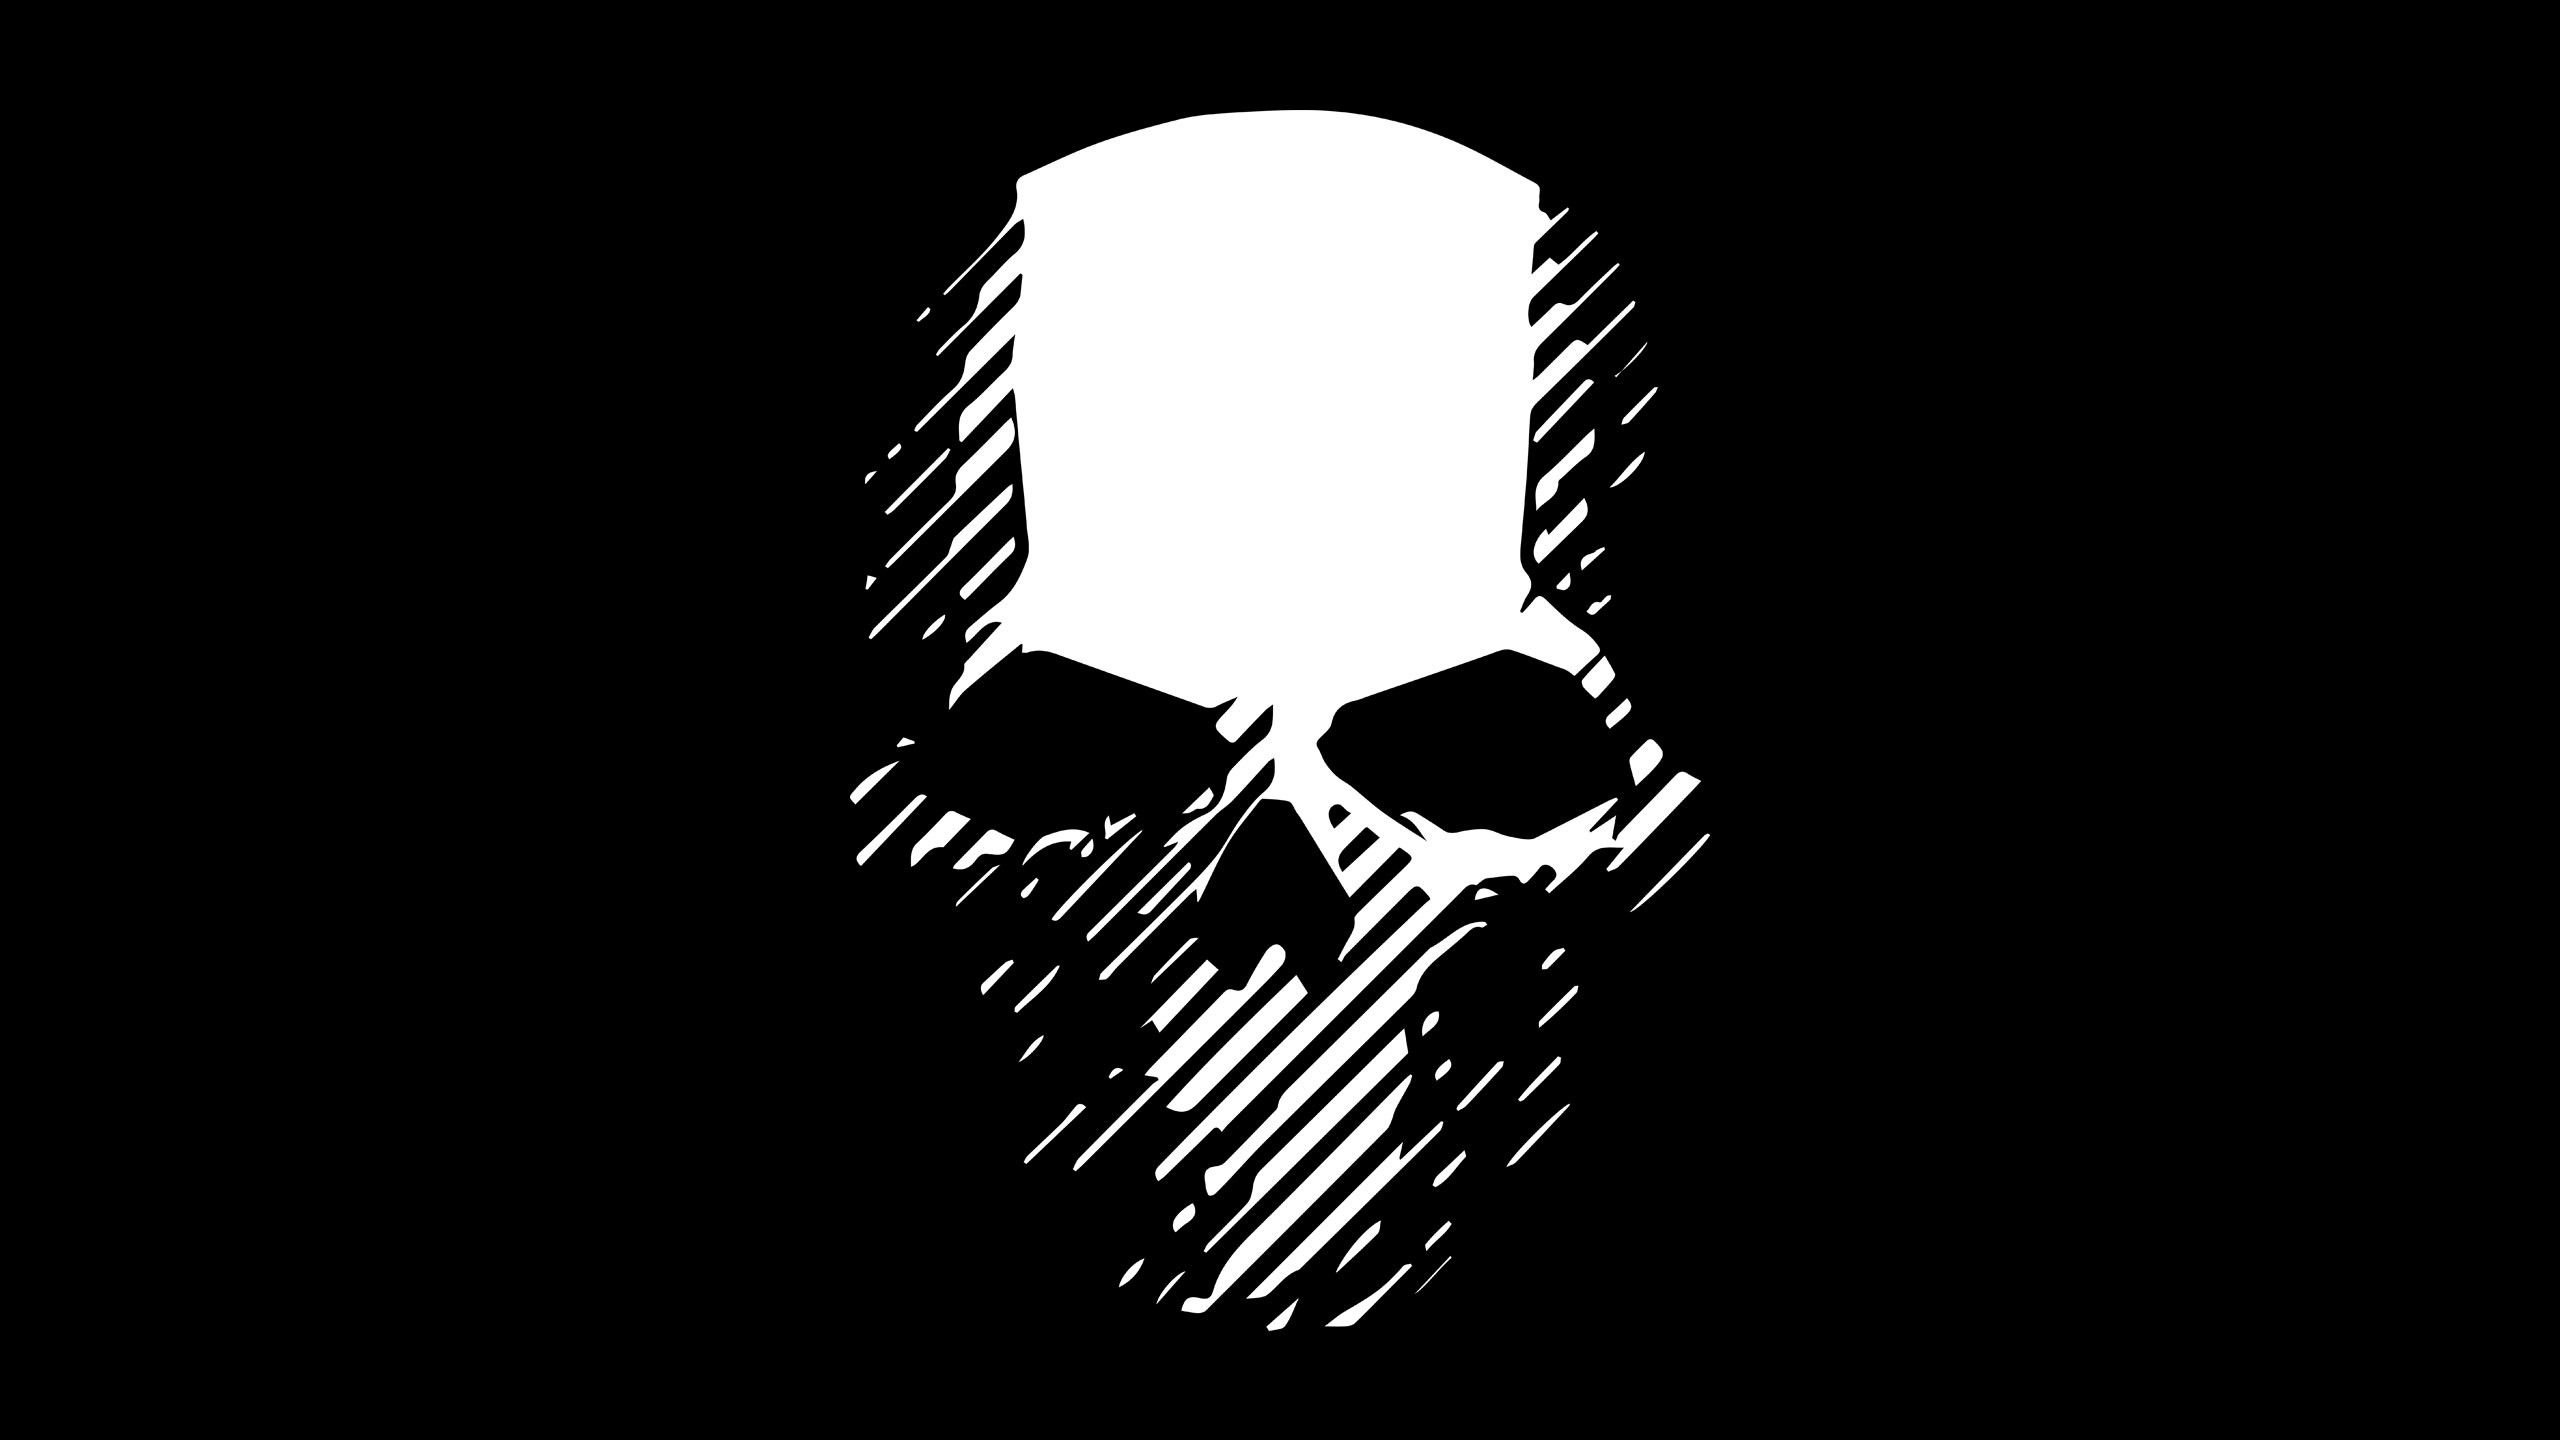 Ghost Recon Skull Wallpaper background picture